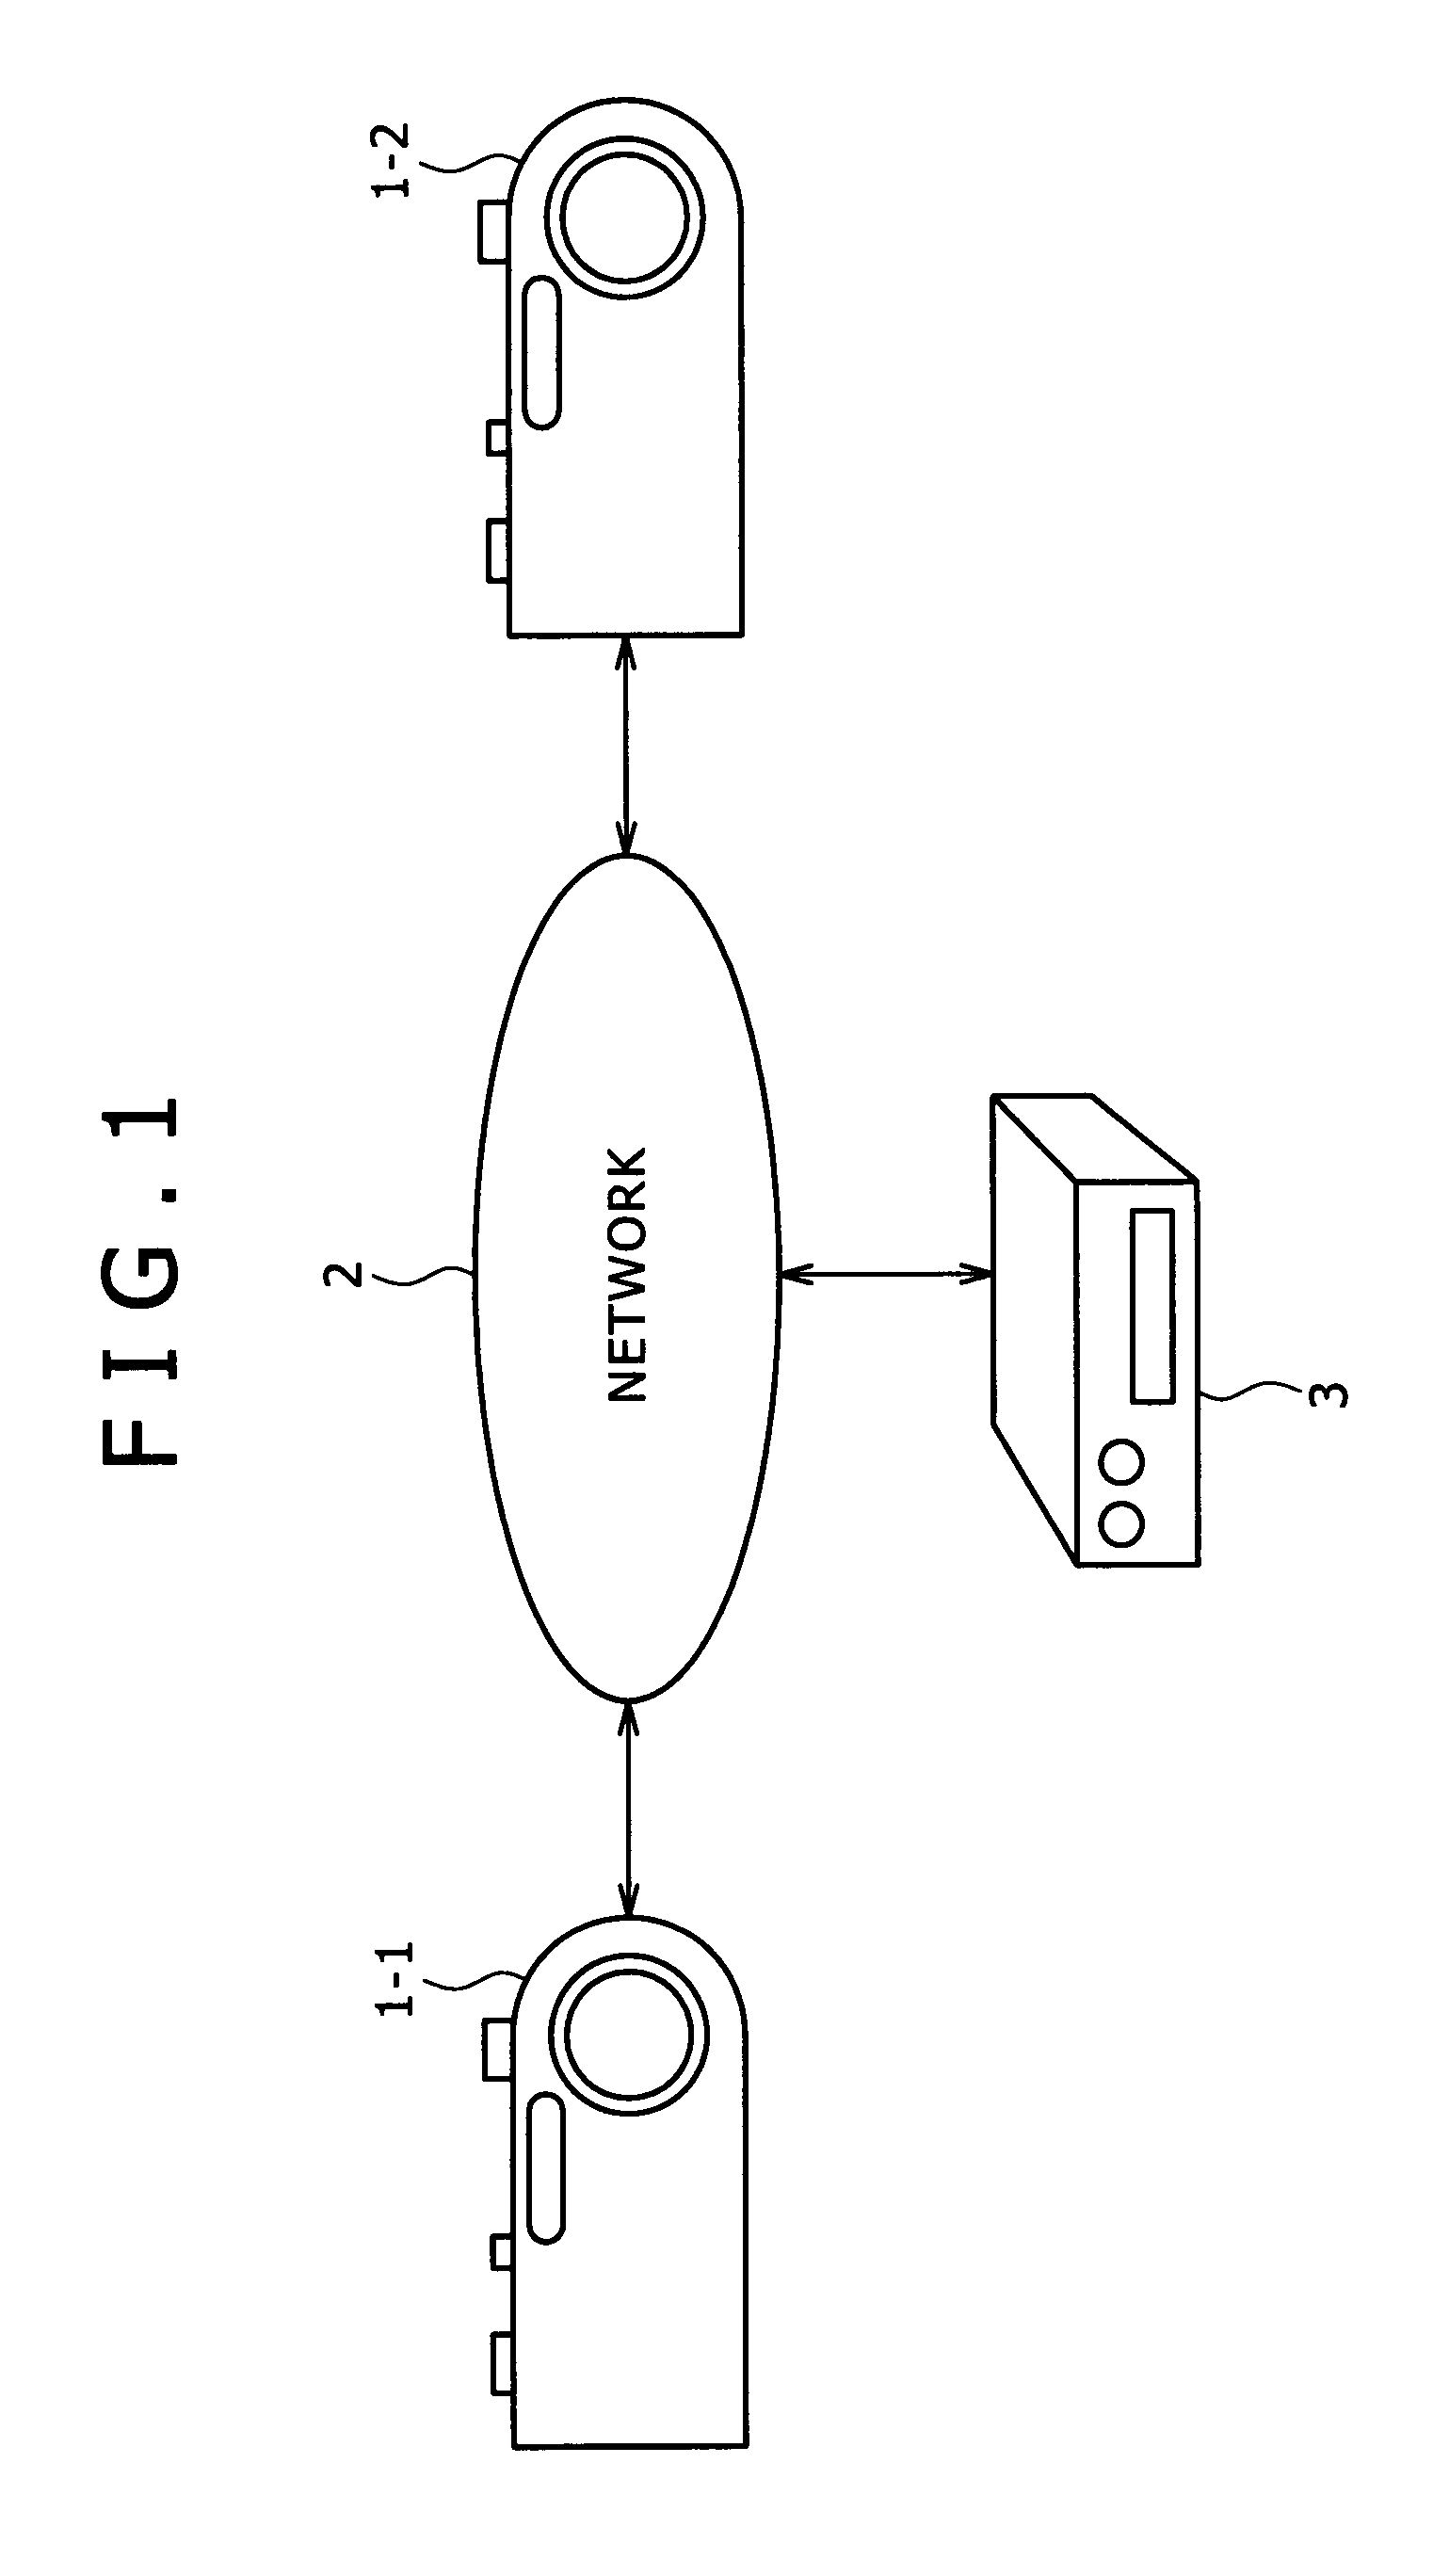 Image taking apparatus and method with display and image storage communication with other image taking apparatus